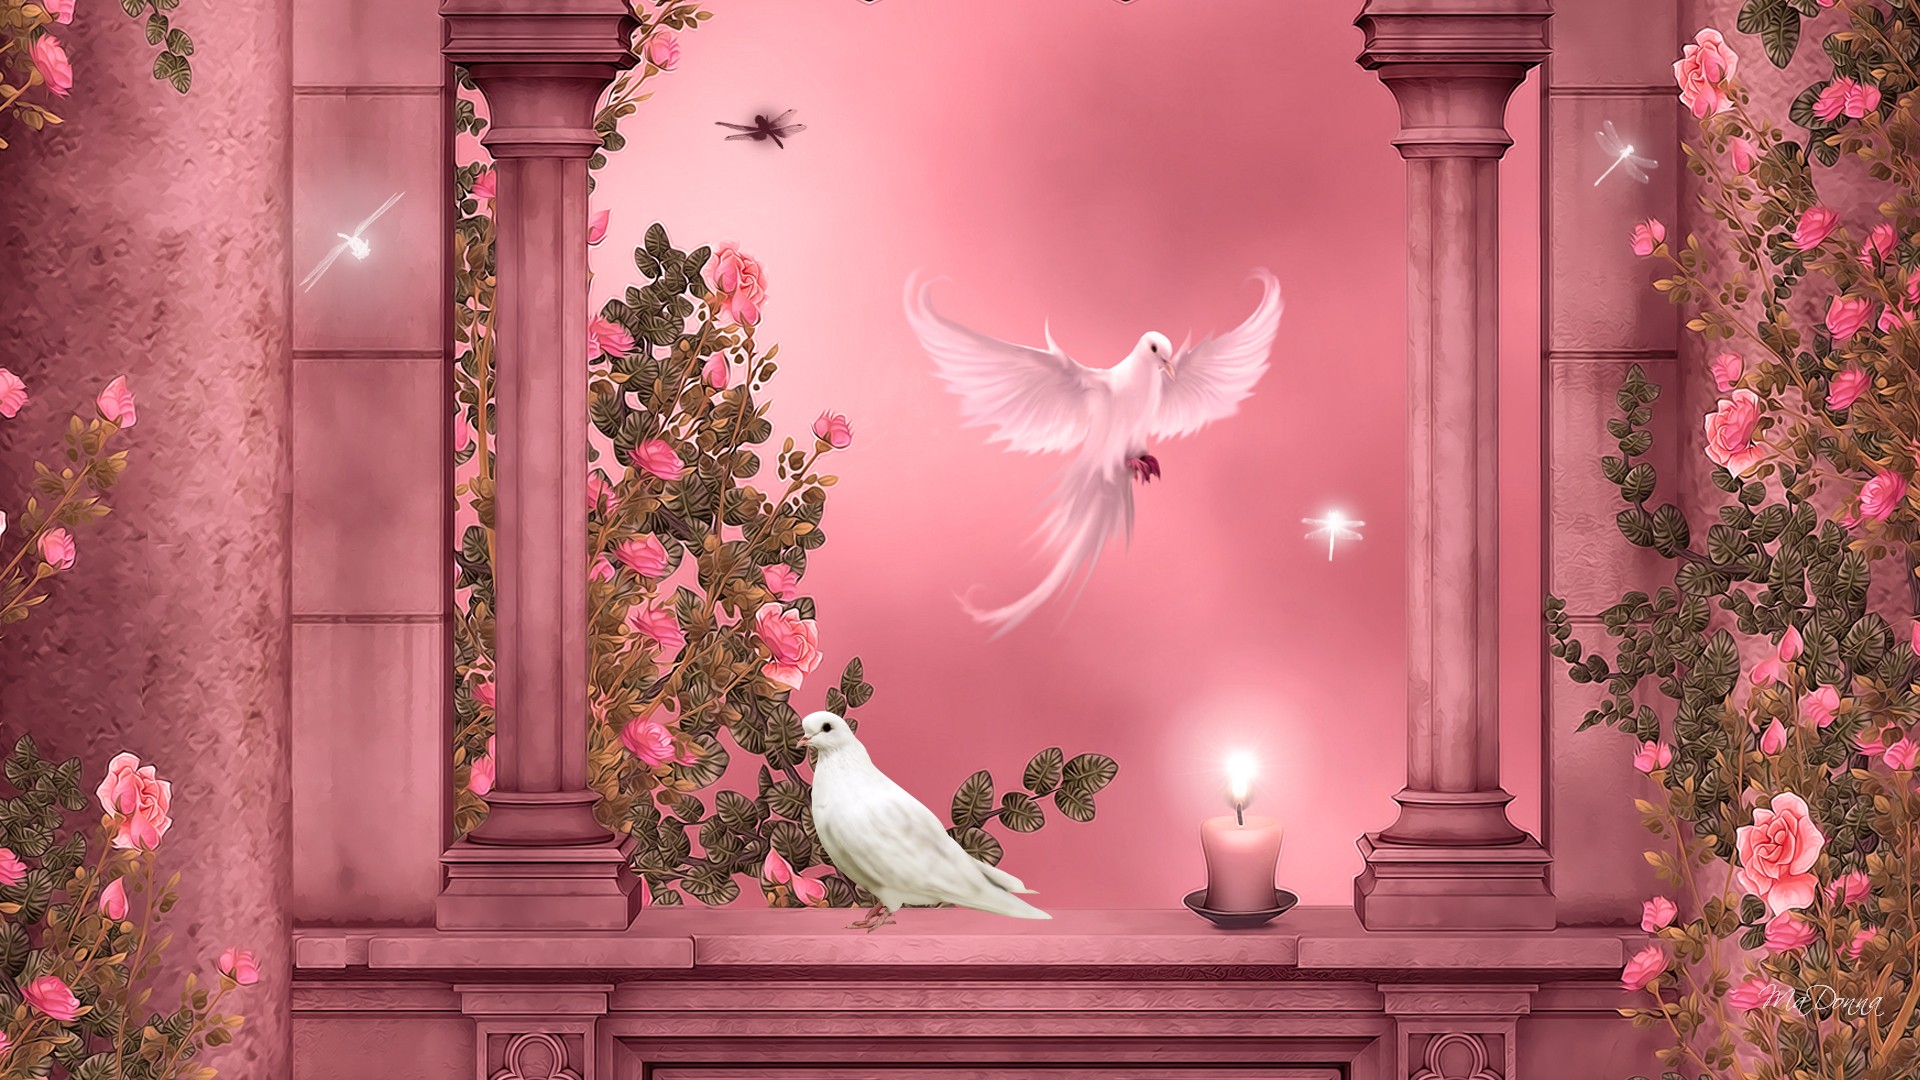 artistic, dove, candle, columns, pink rose, pink, rose